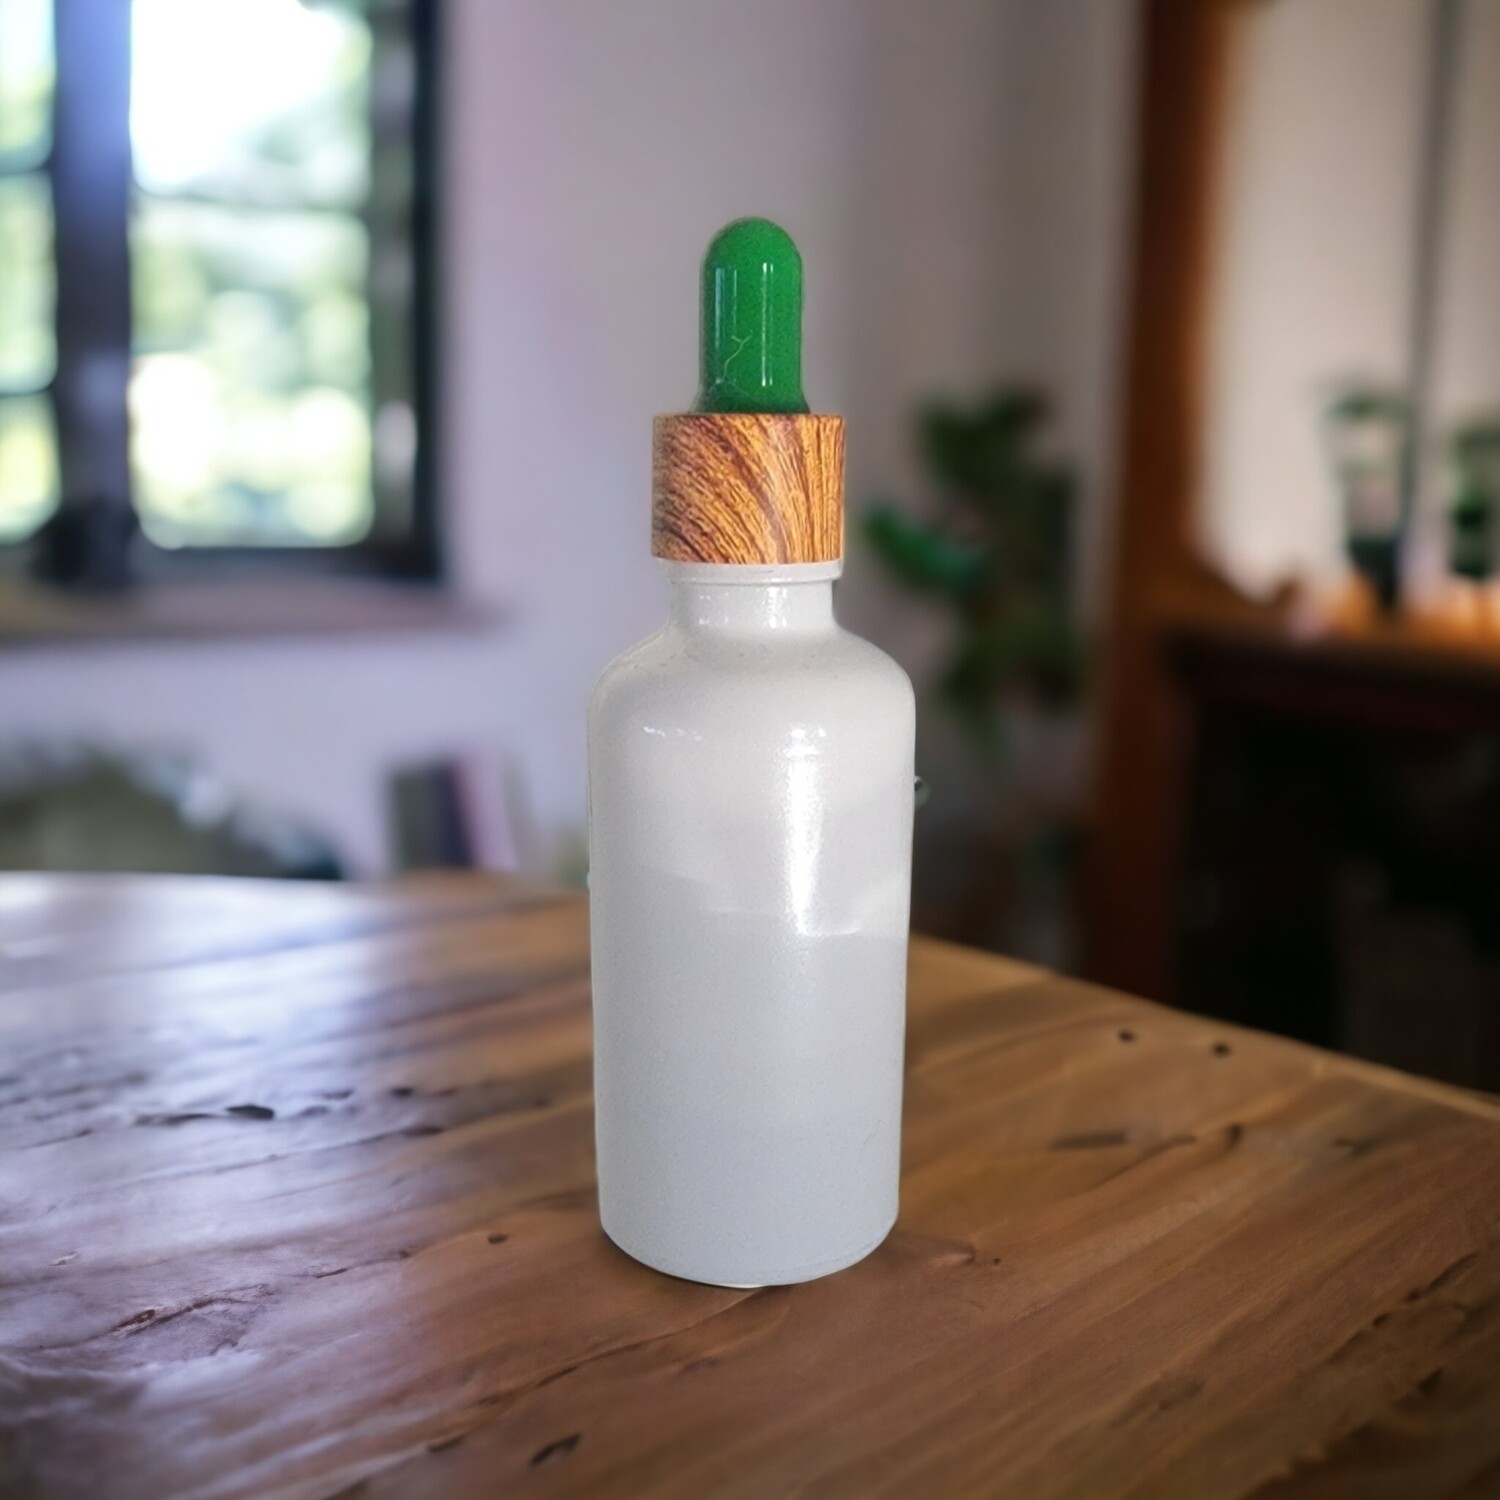 100mL WHITE PEARL (Coated) glass dropper bottle with GREEN TEAT & IMITATION TIMBER CAP